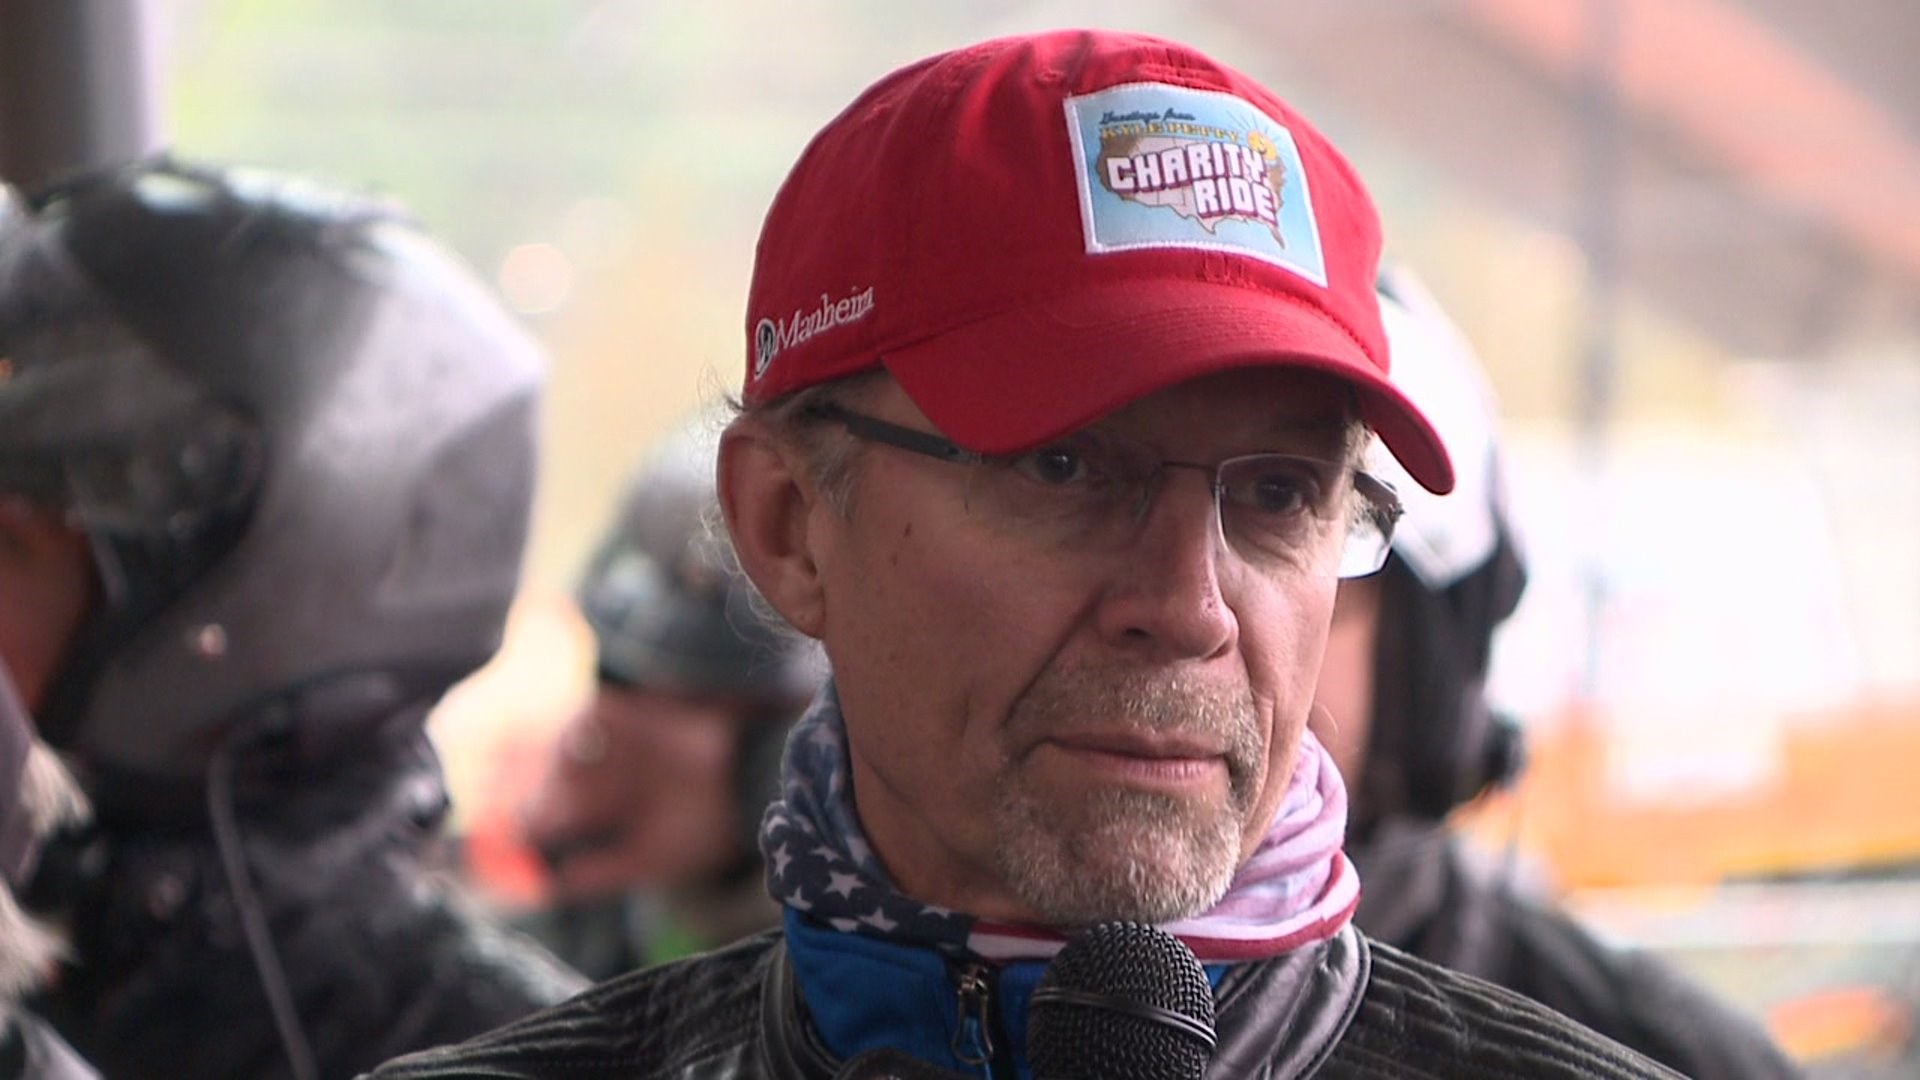 Kyle Petty Leads Annual Charity Ride